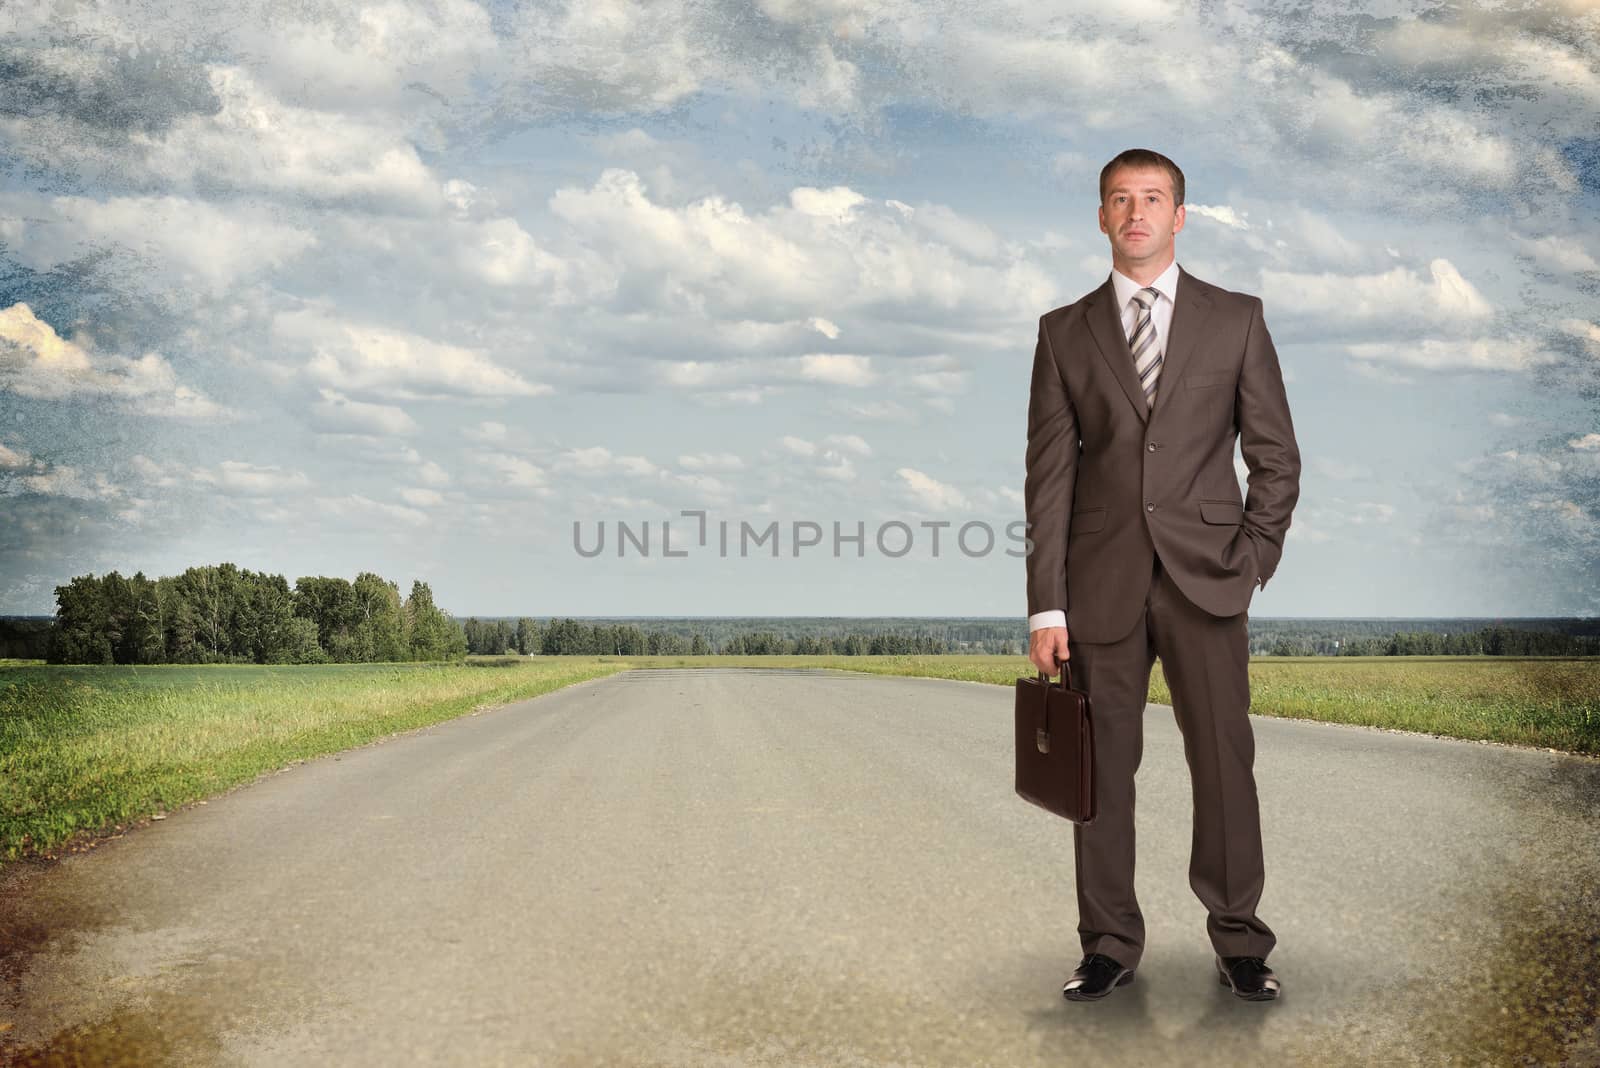 Businessman in suit with briefcase standing on the road. Business concept